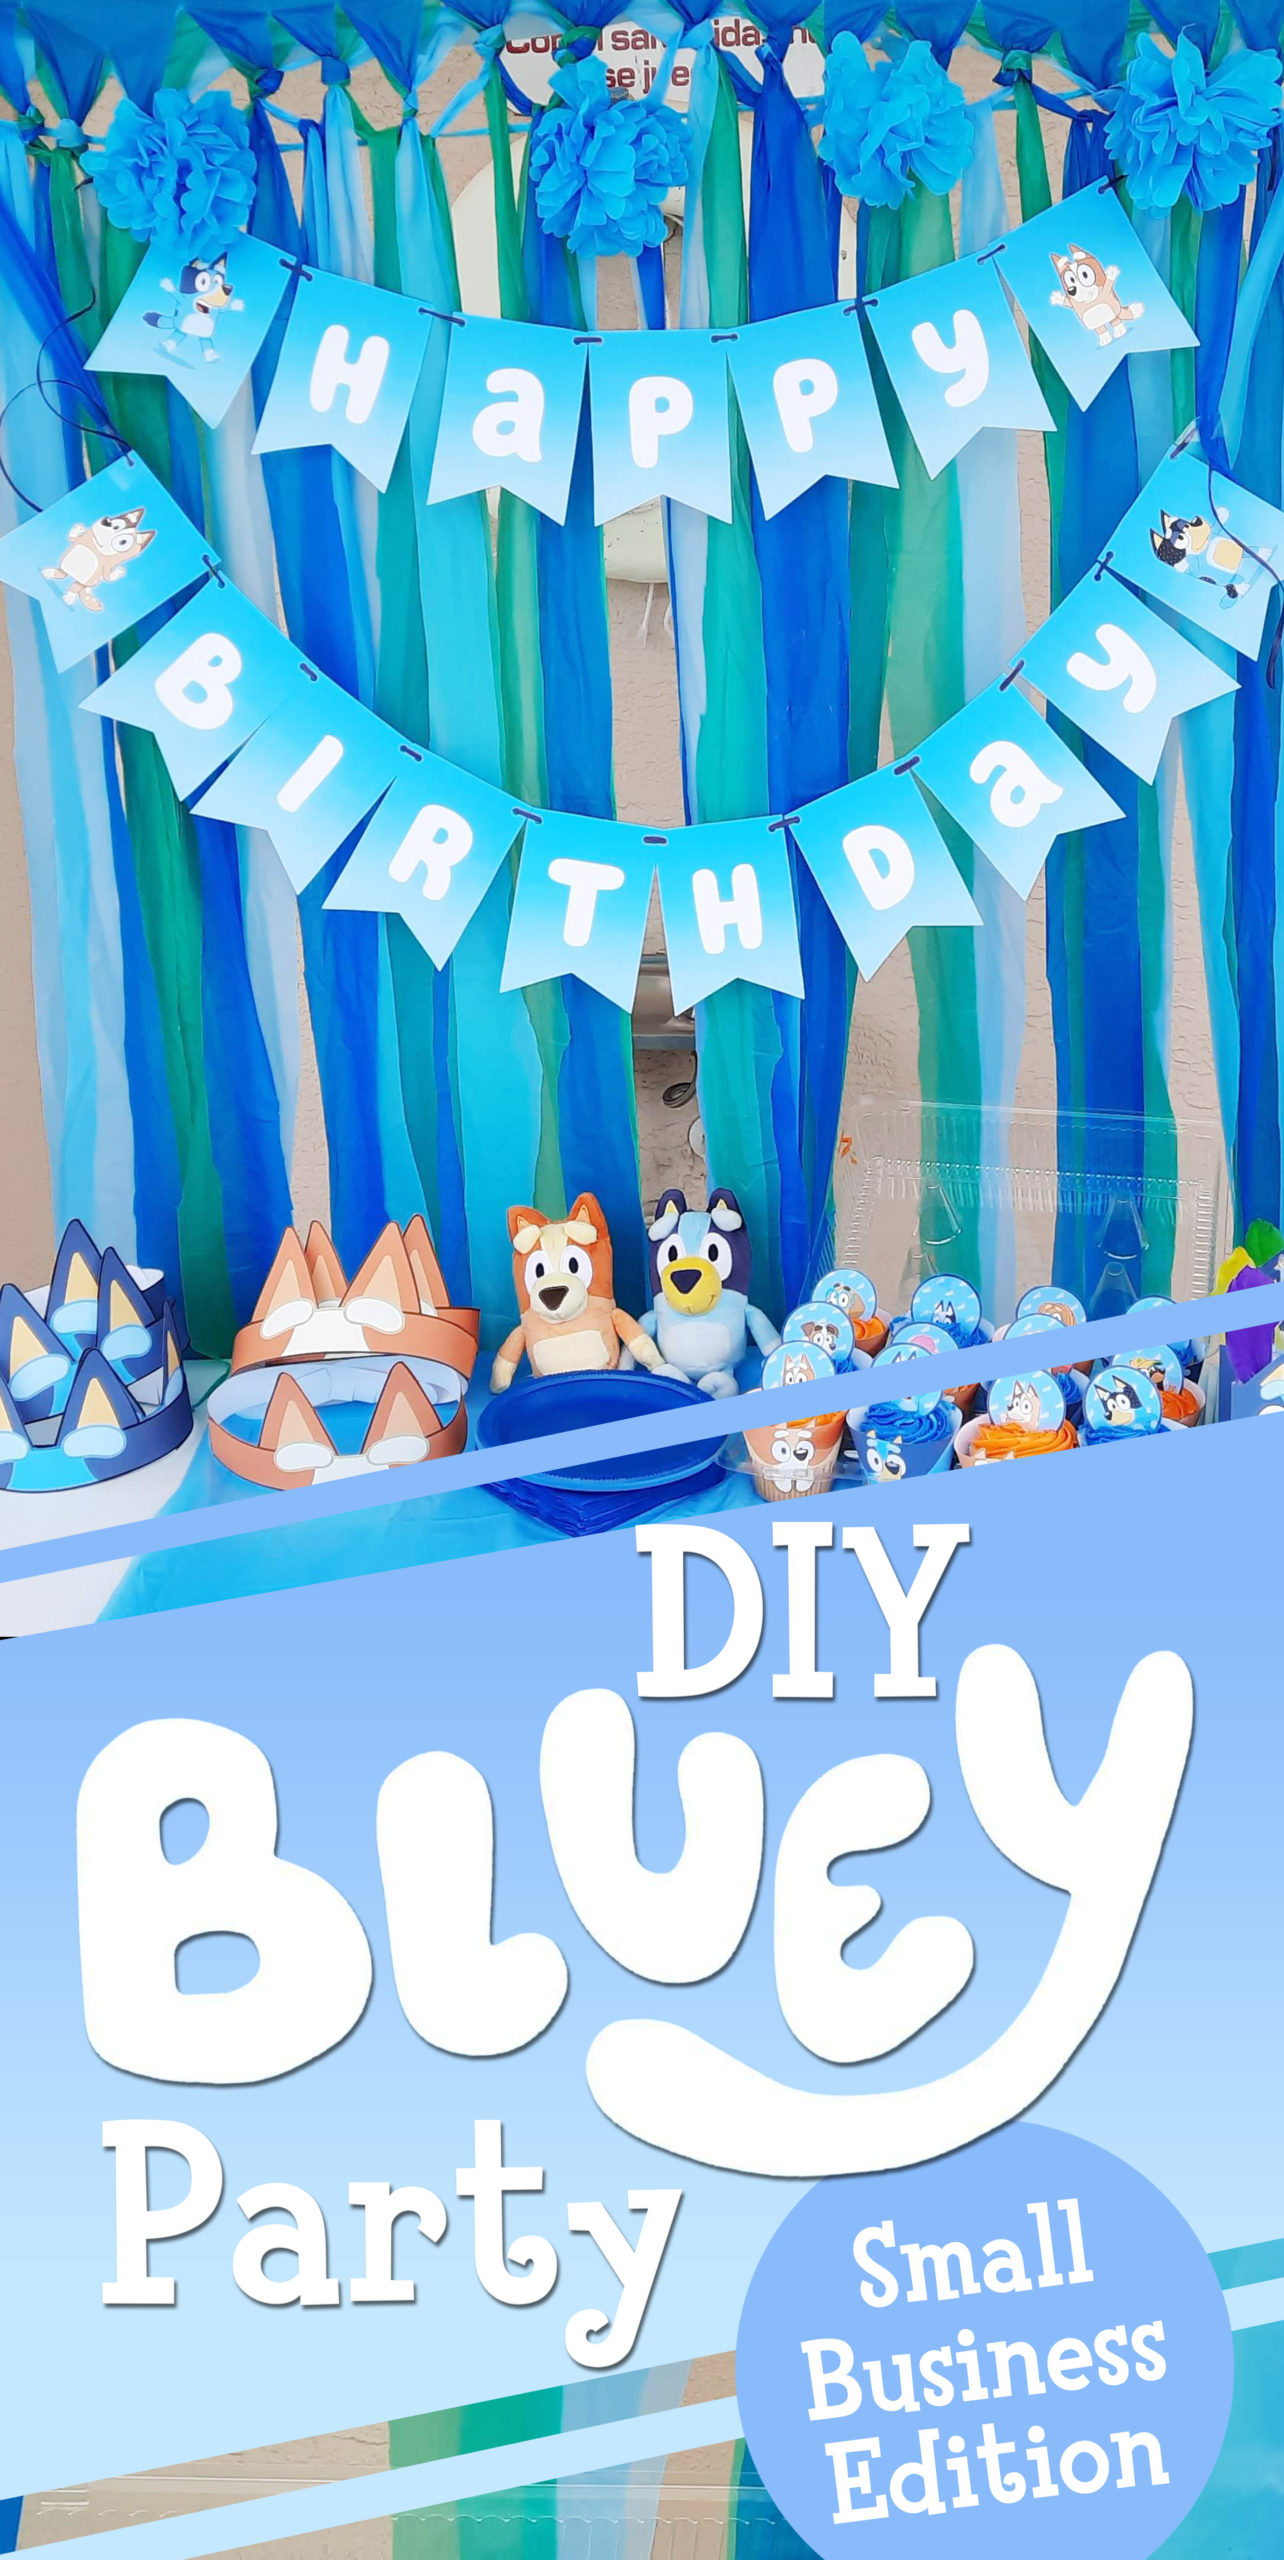 Bluey Party Supplies